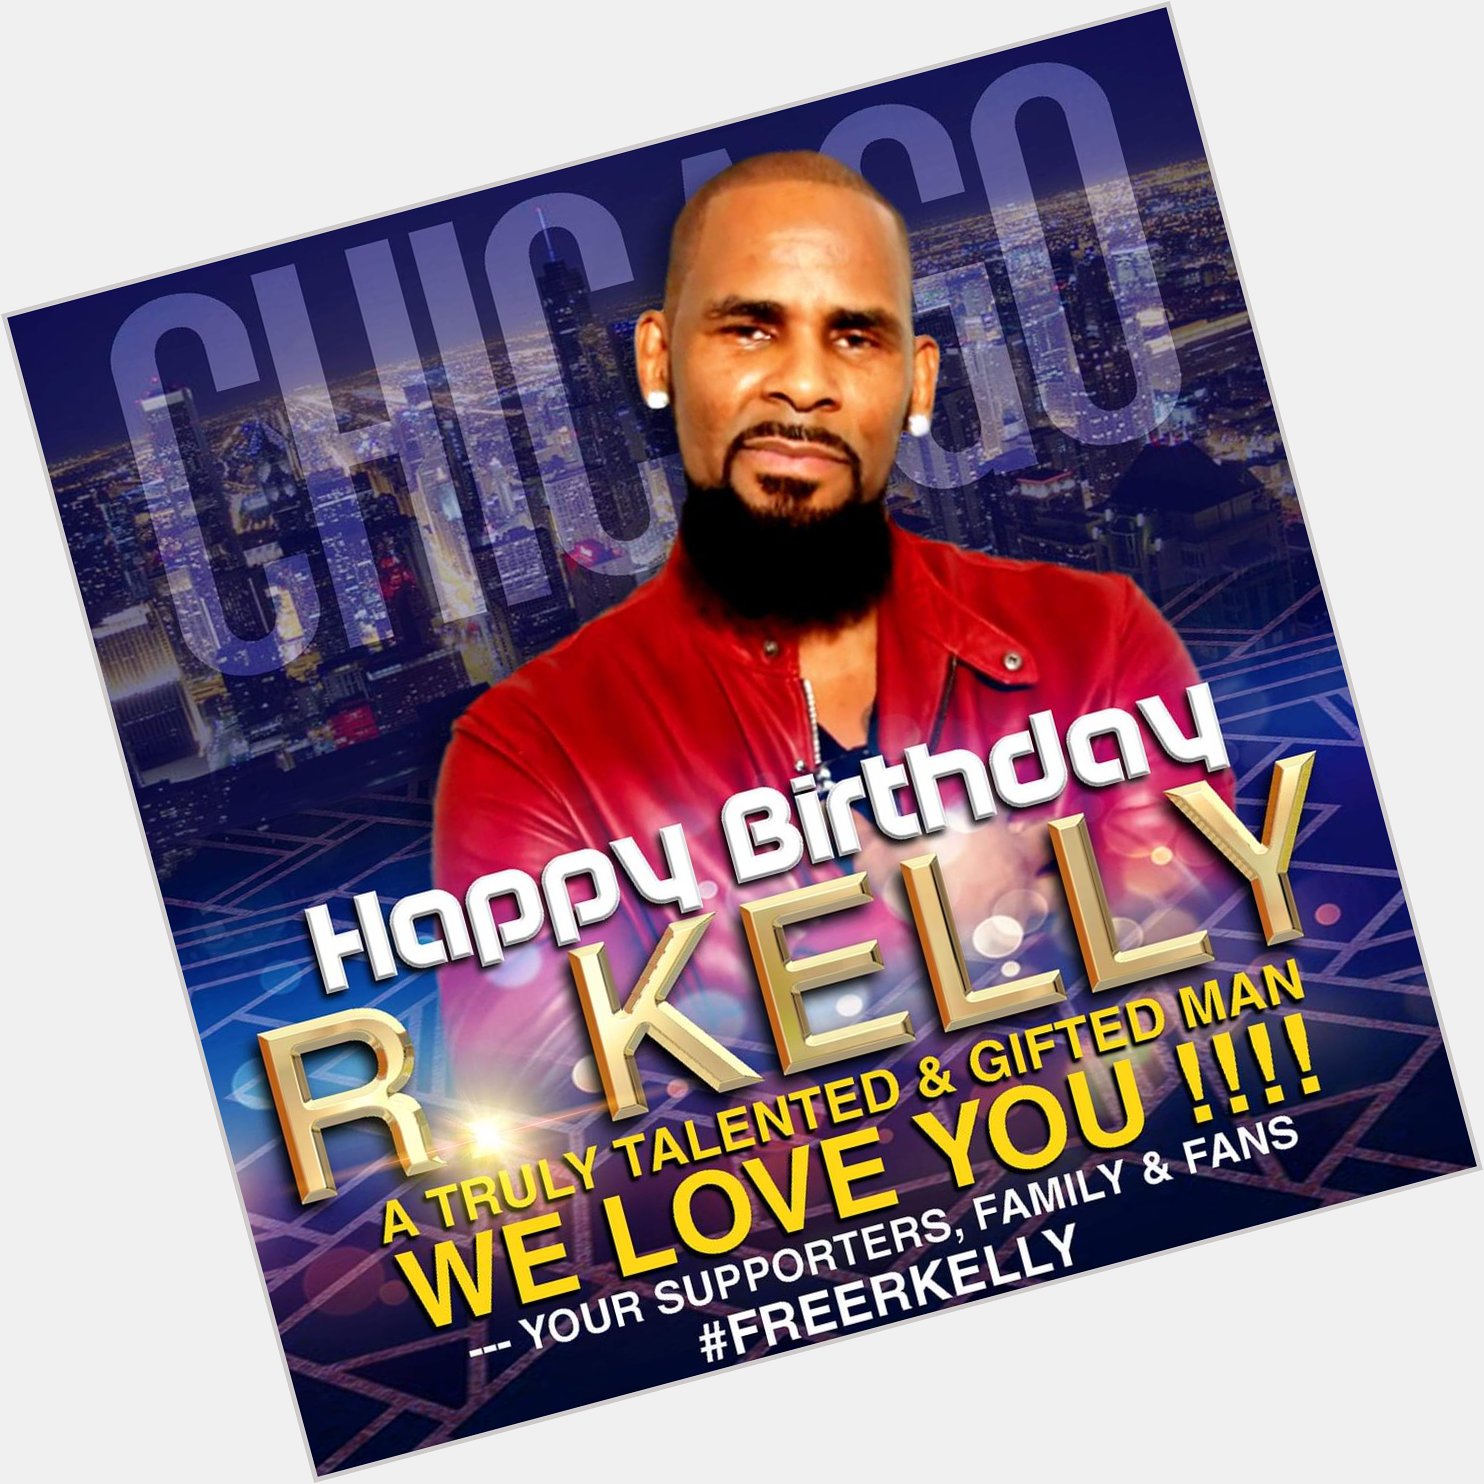 JUST WANT TO SAY HAPPY BIRTHDAY TO THE KING OF R&B R.KELLY 